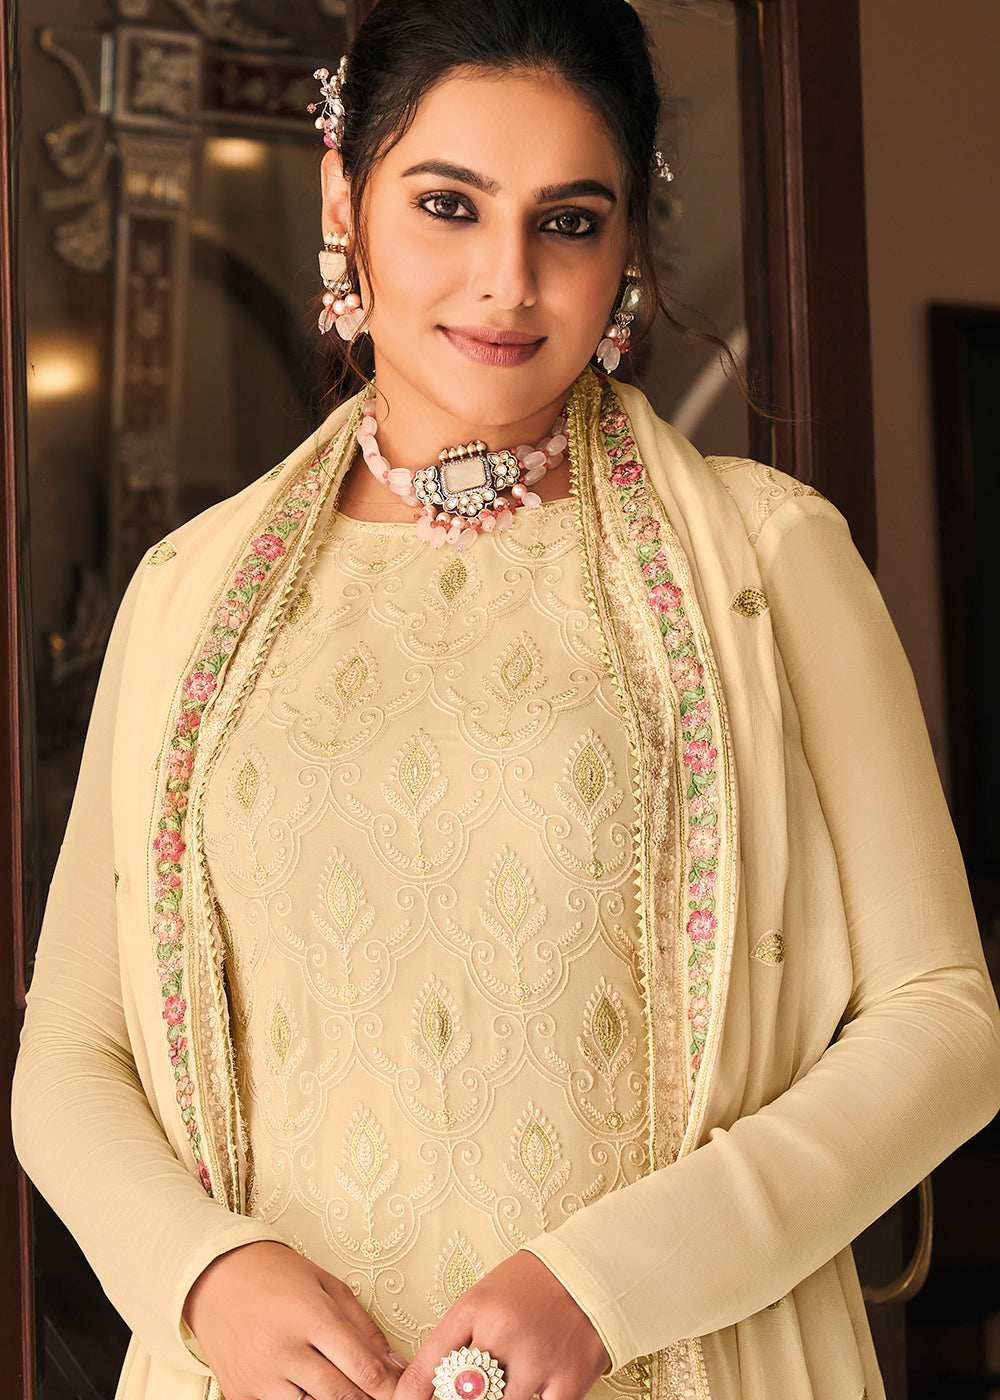 Buy Now Pakistani Style Graceful Cream Function Wear Salwar Suit Online in Canada at Empress Clothing.